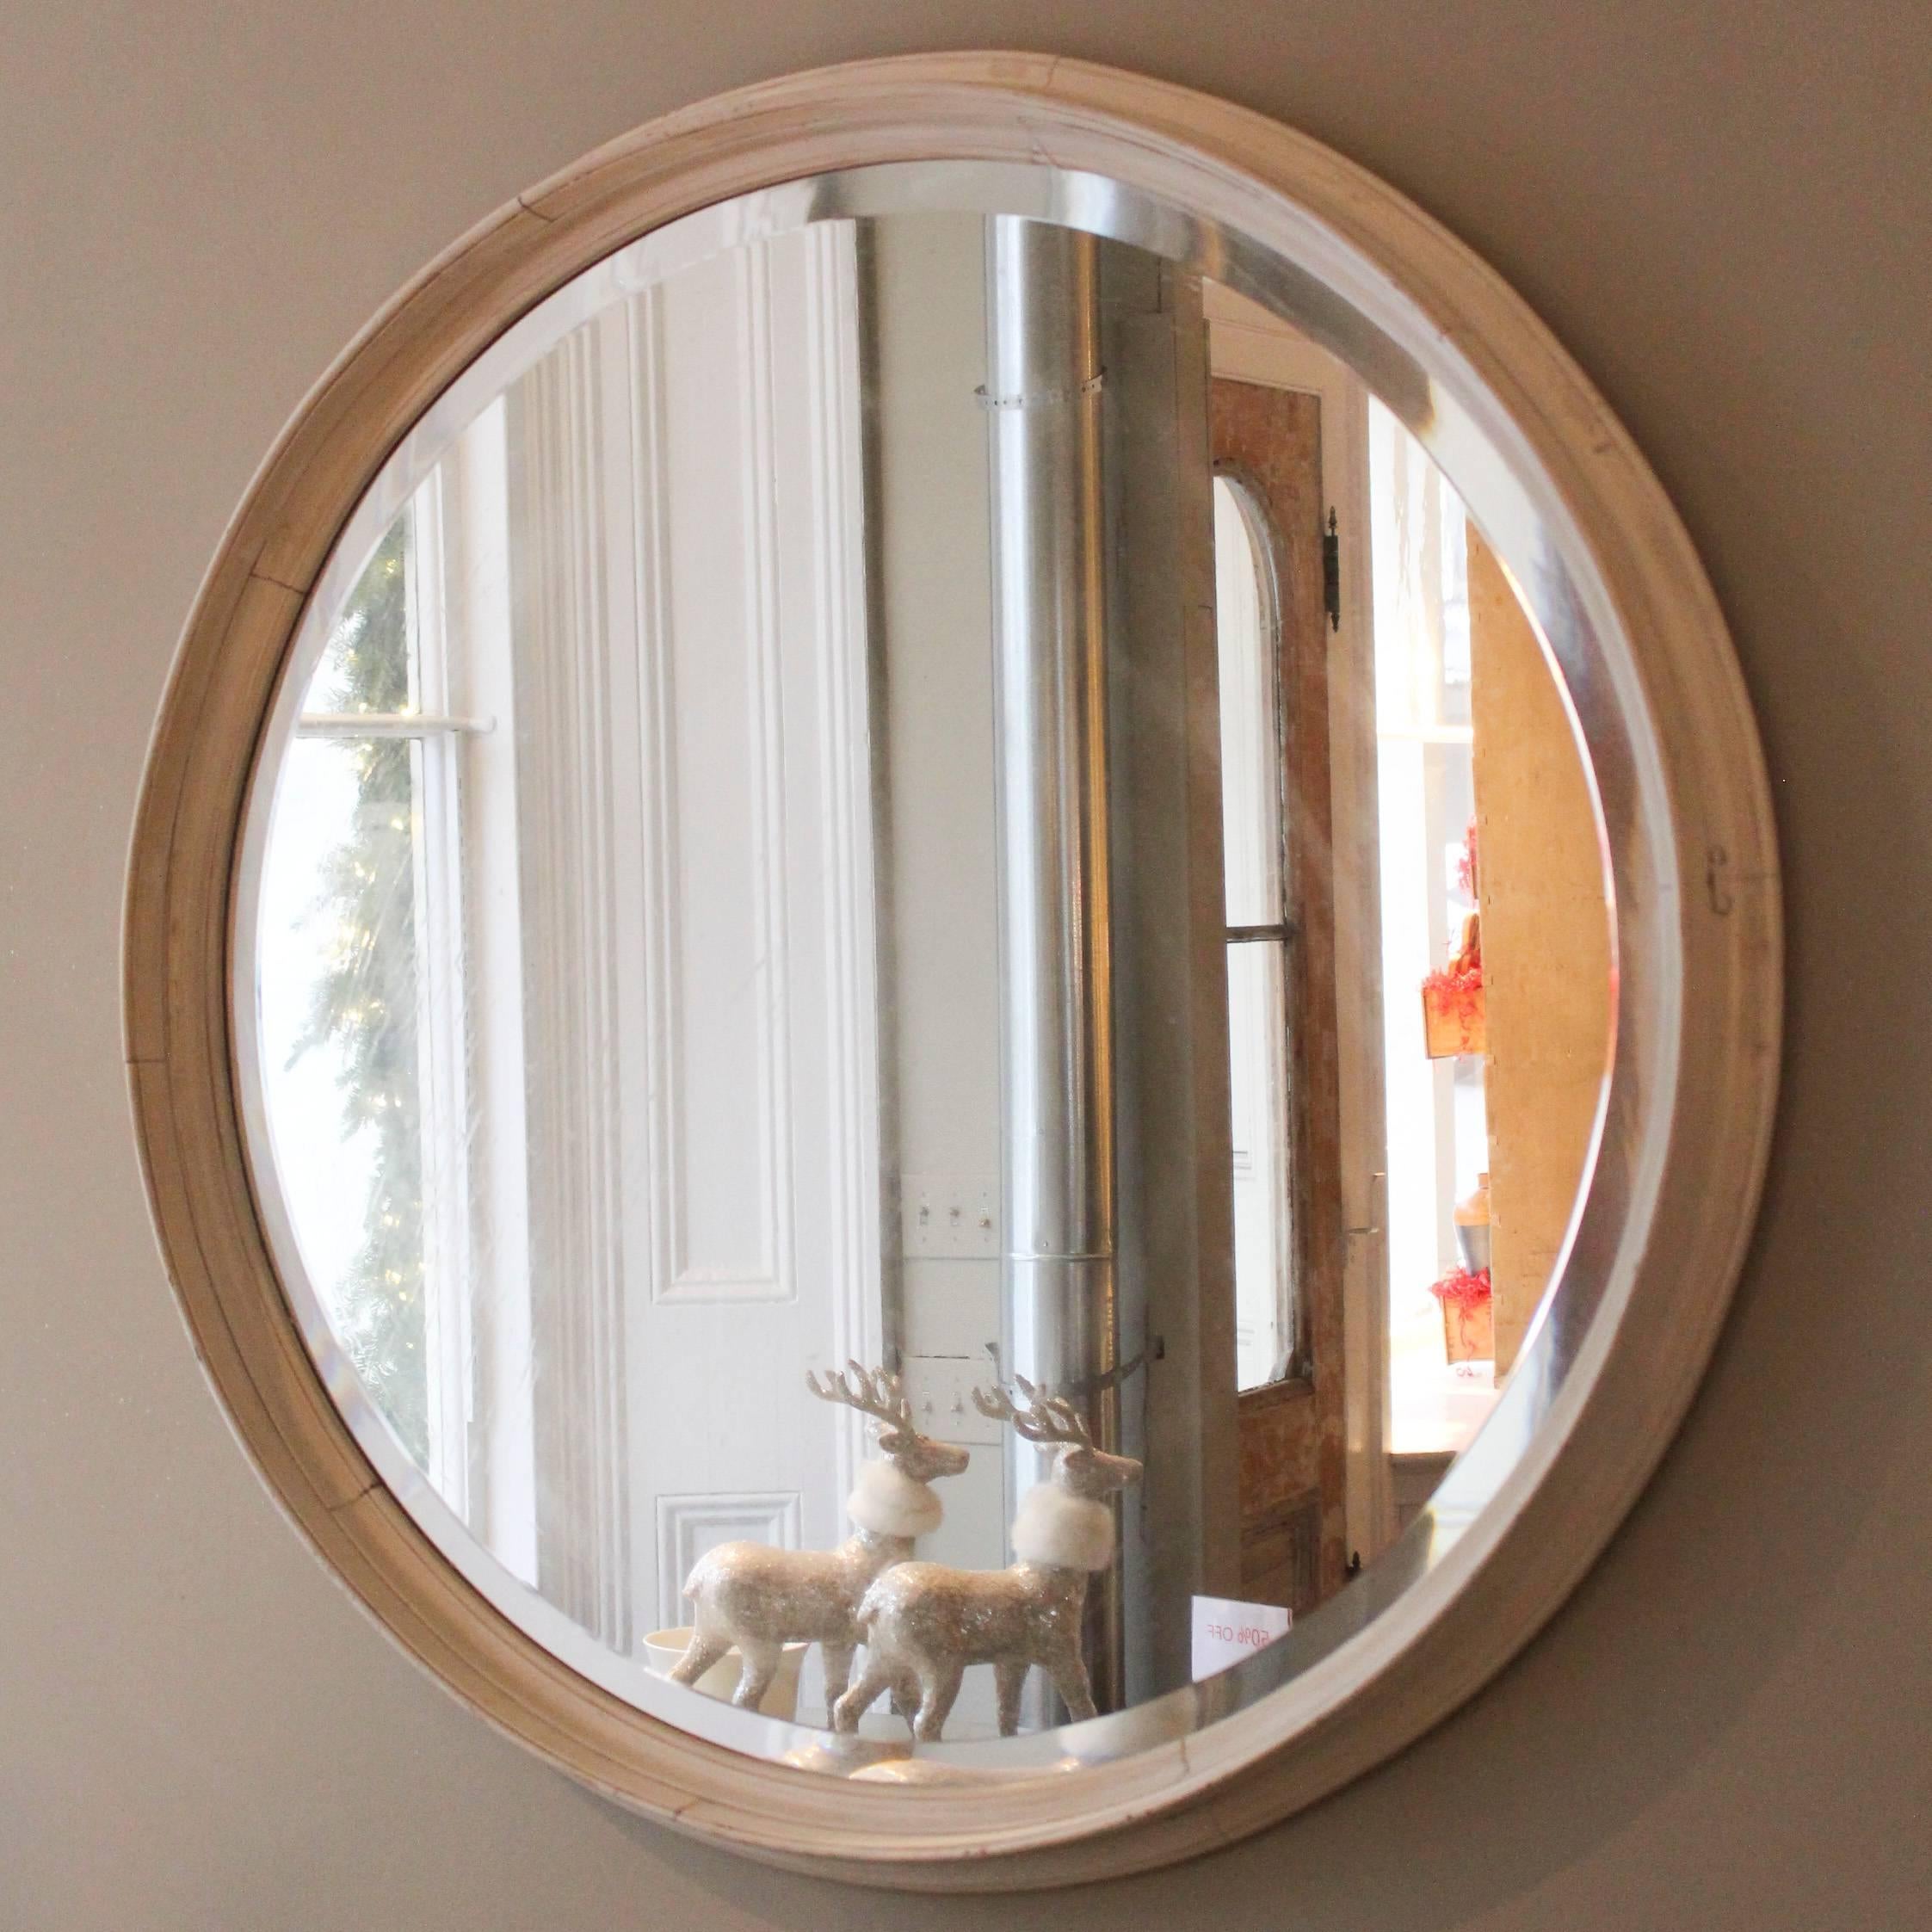 Outsized distressed bevelled glass round mirror, late 20th century with wood frame in oyster paint.